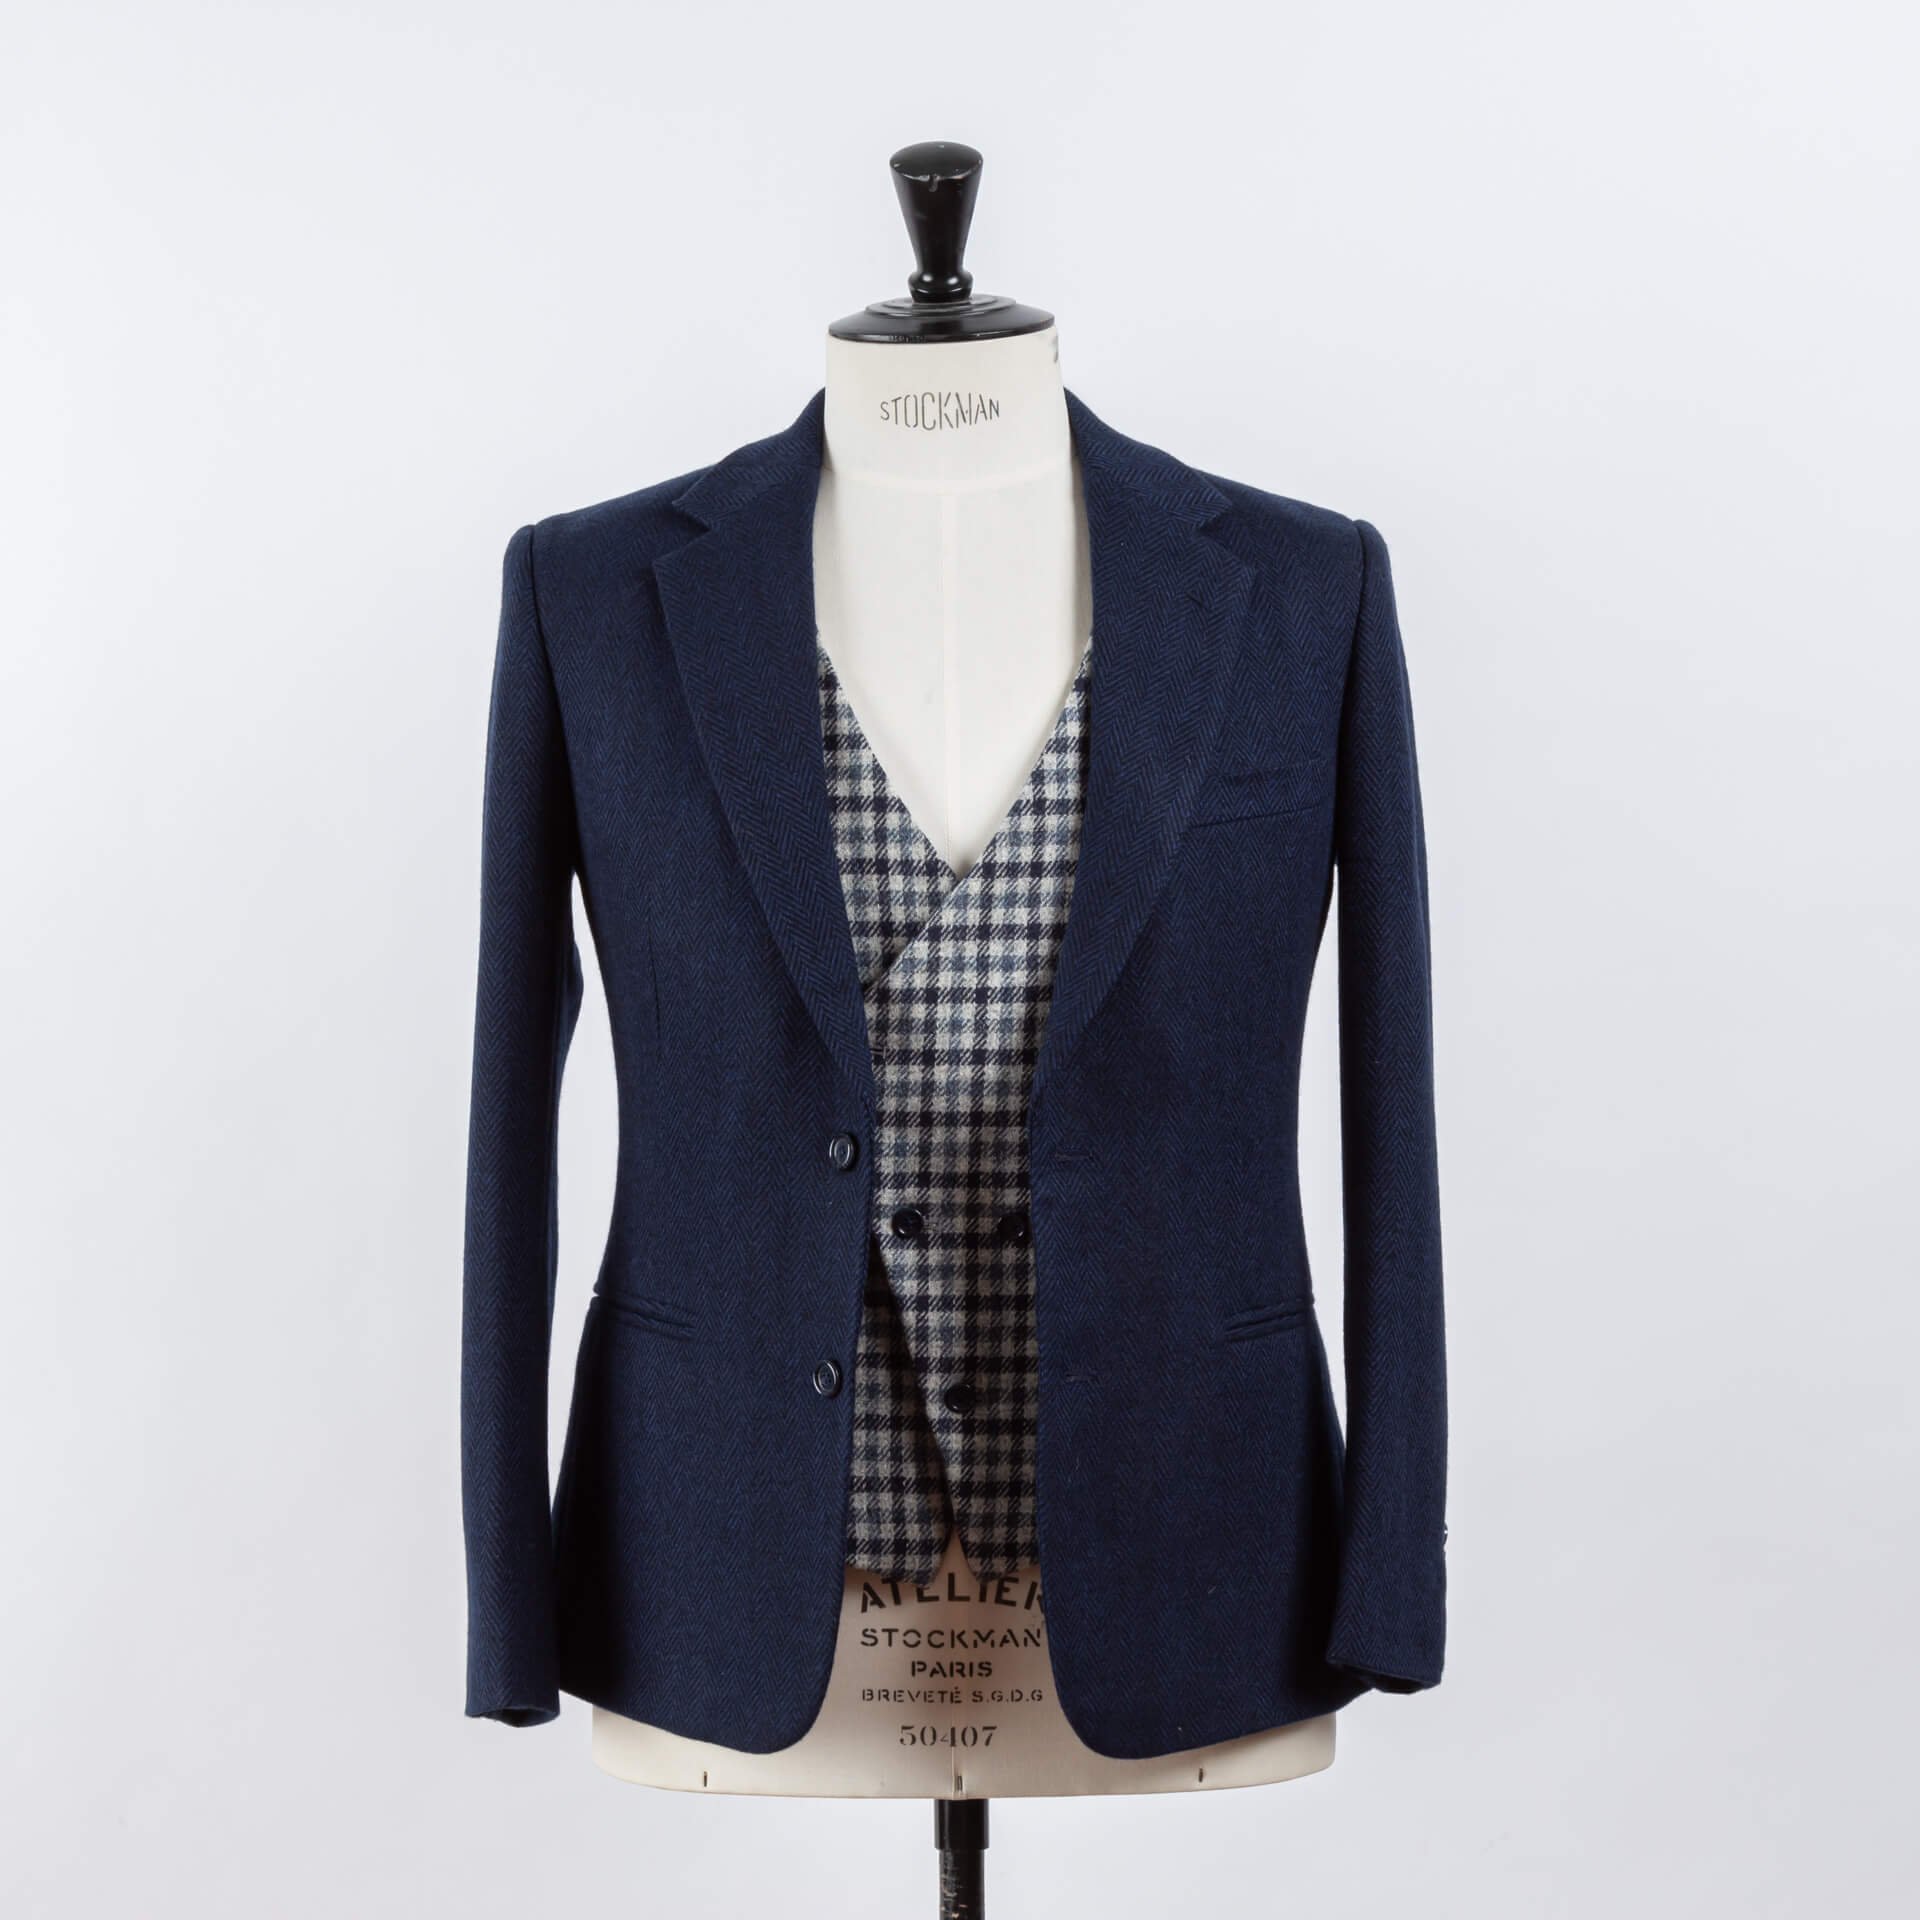 Business Casual Outfit Flanel Tweed